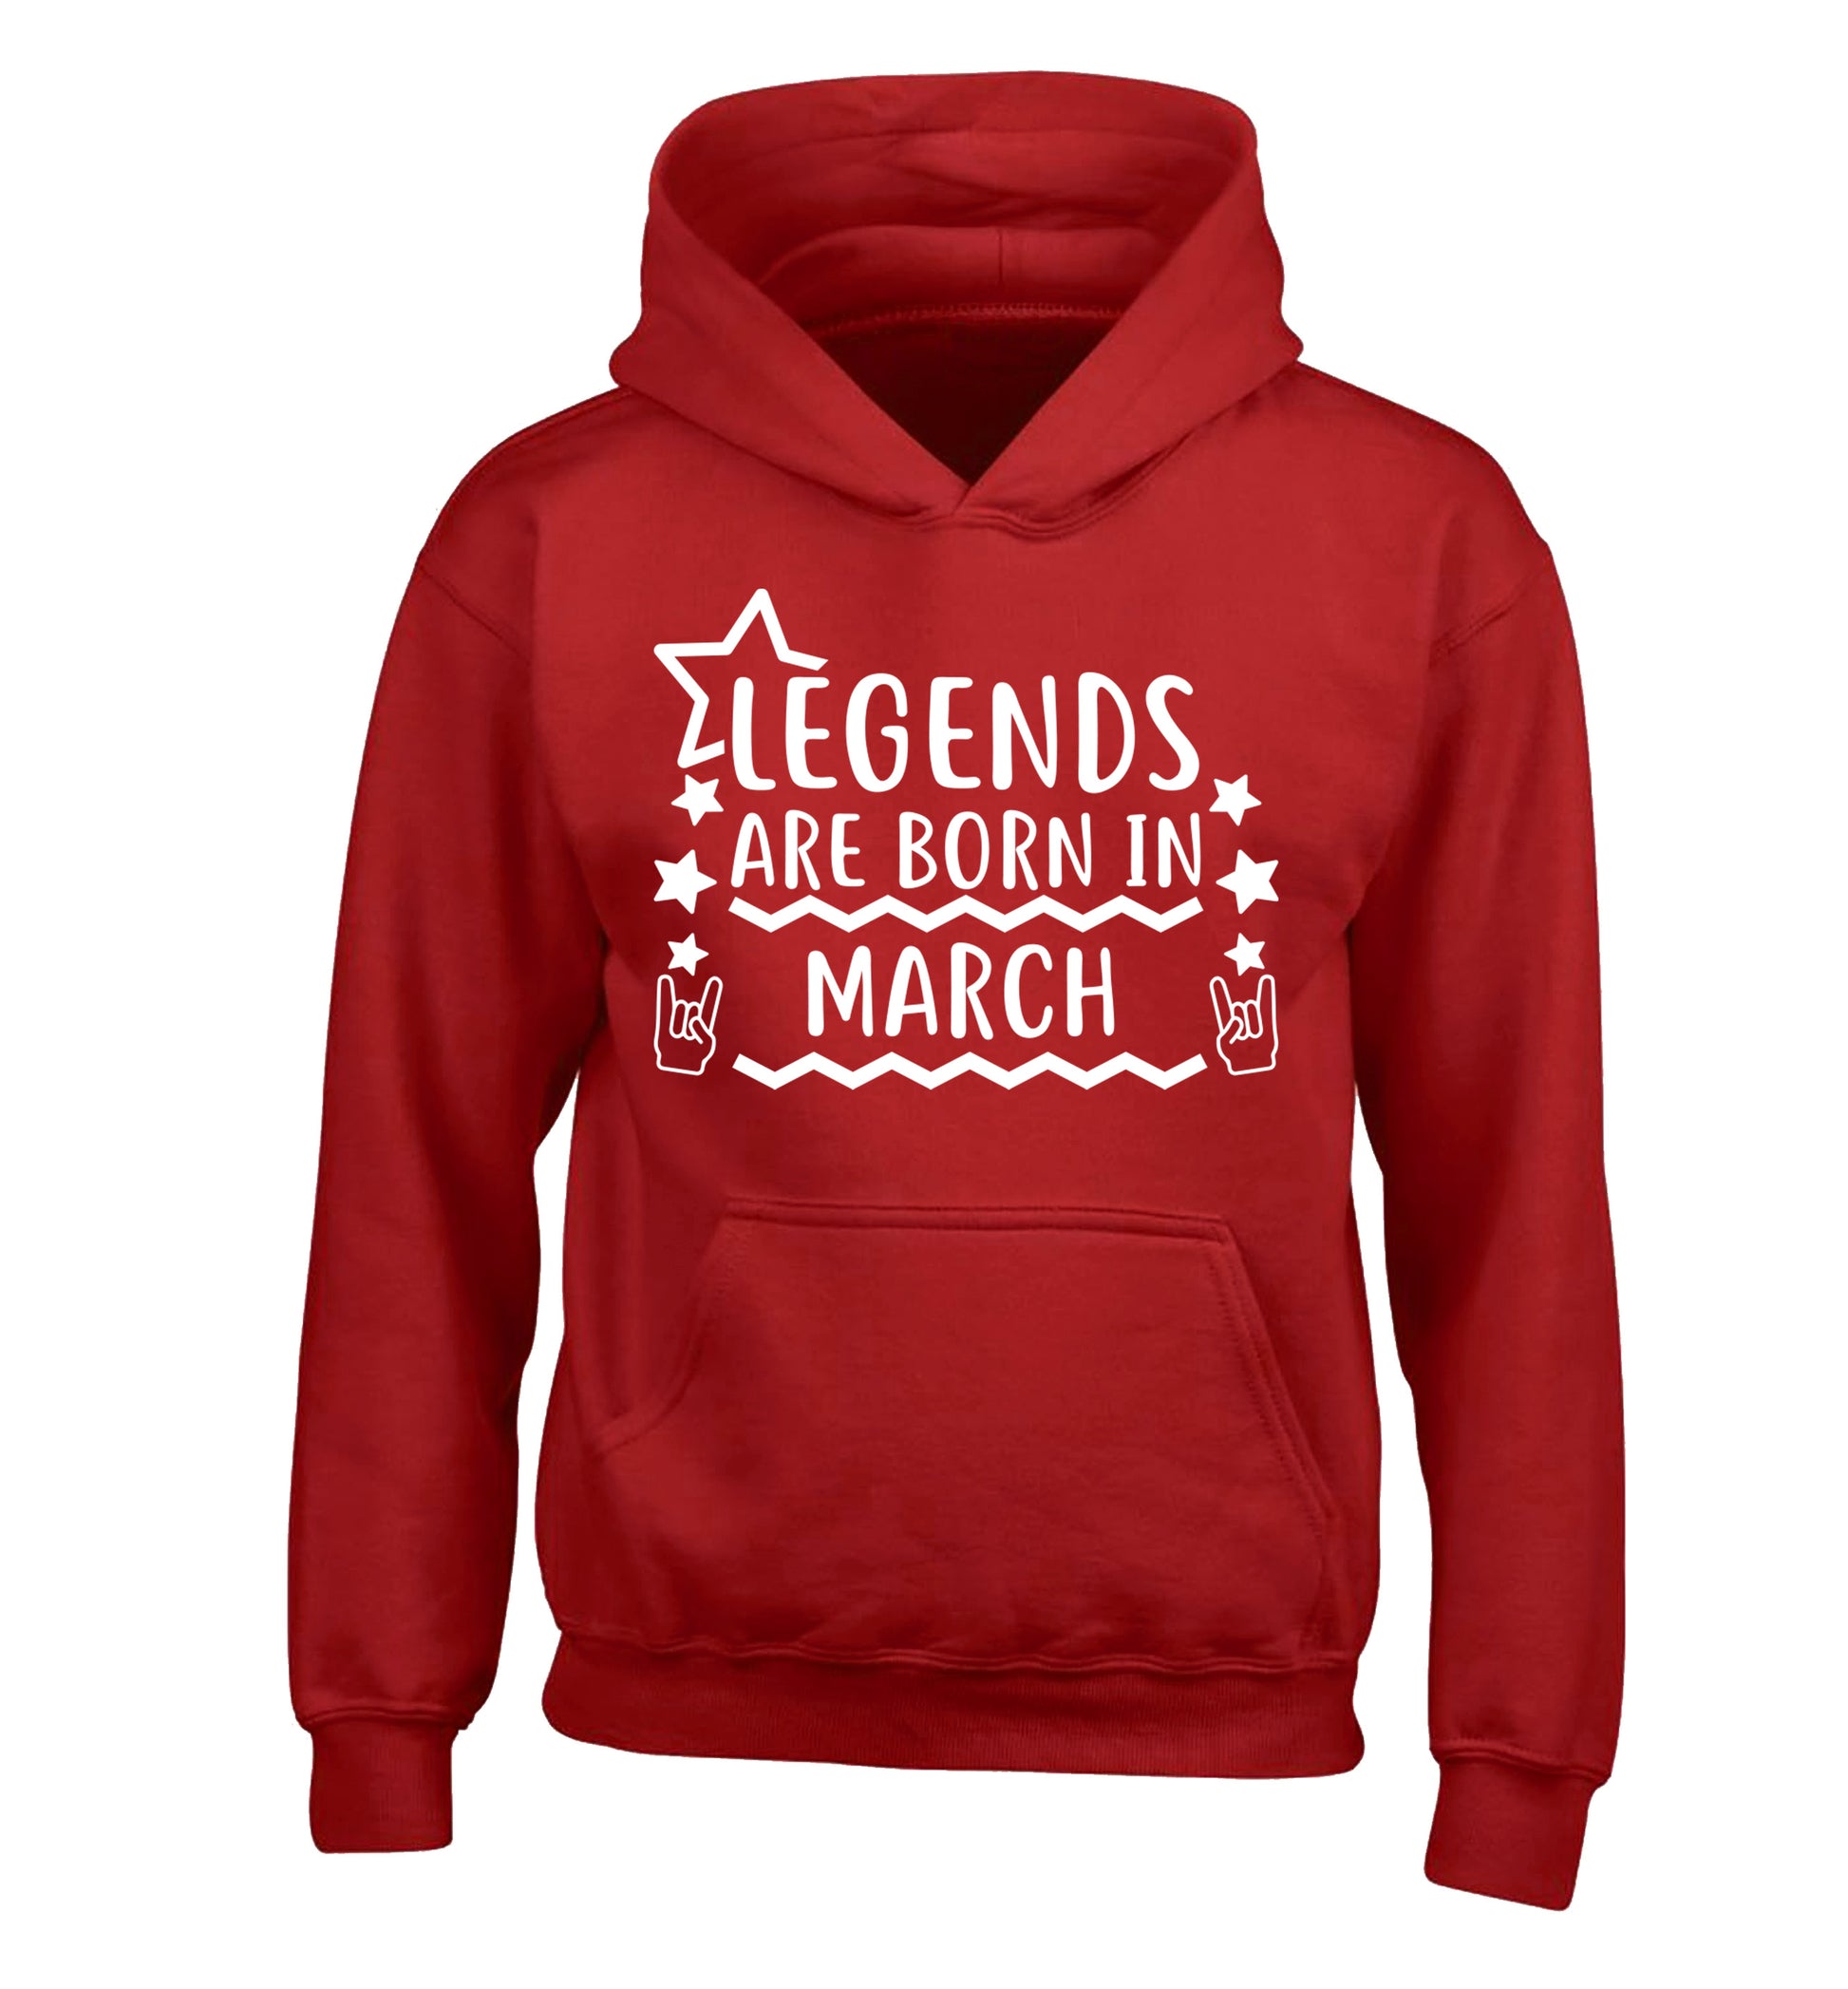 Legends are born in March children's red hoodie 12-13 Years